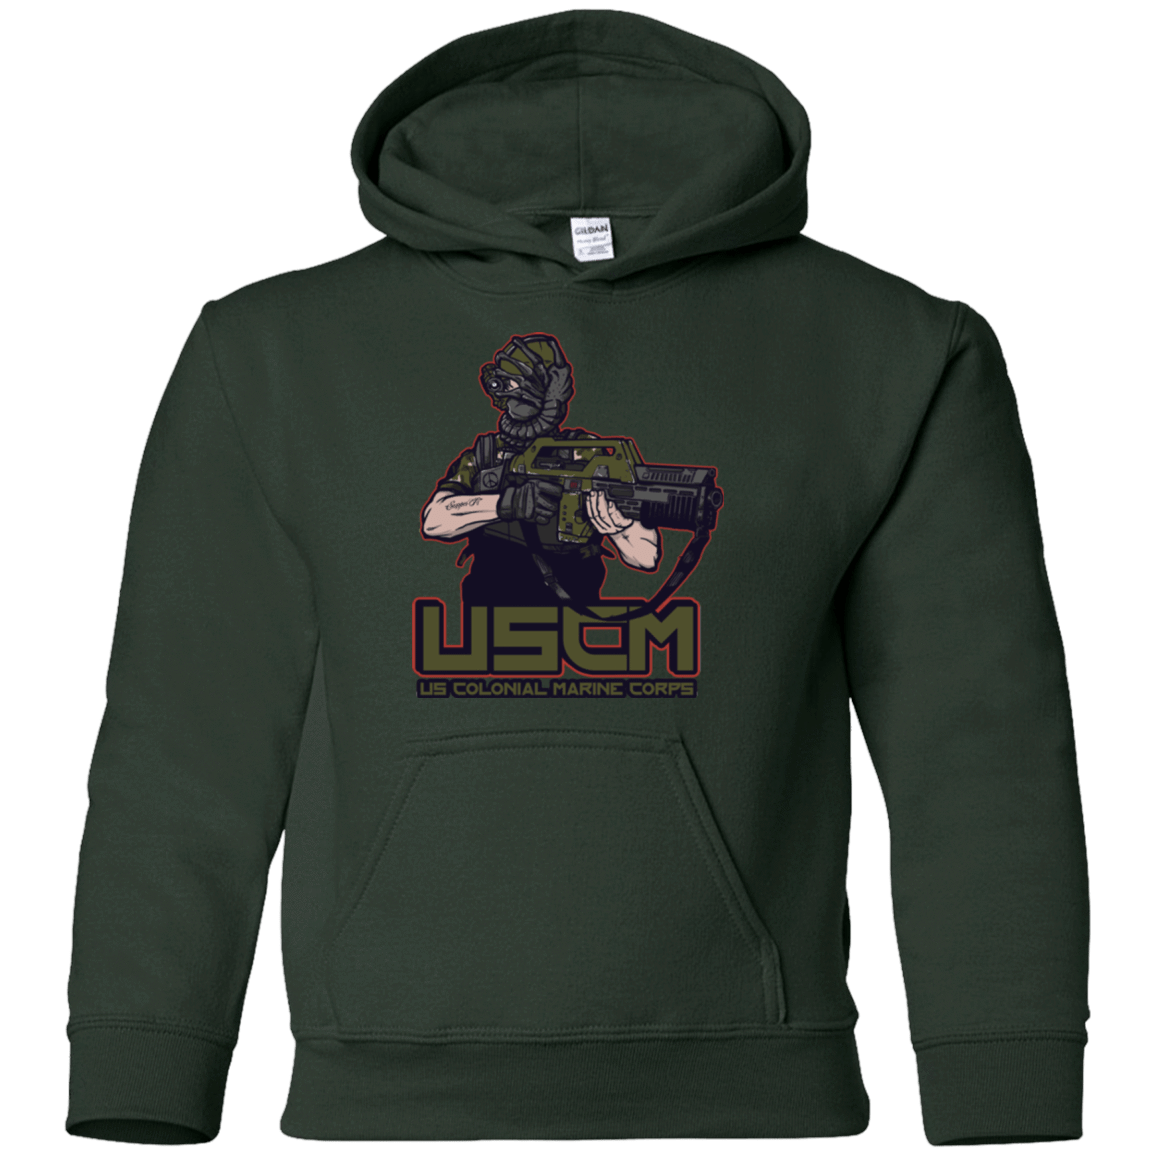 Sweatshirts Forest Green / YS Colonial Facehugger Youth Hoodie